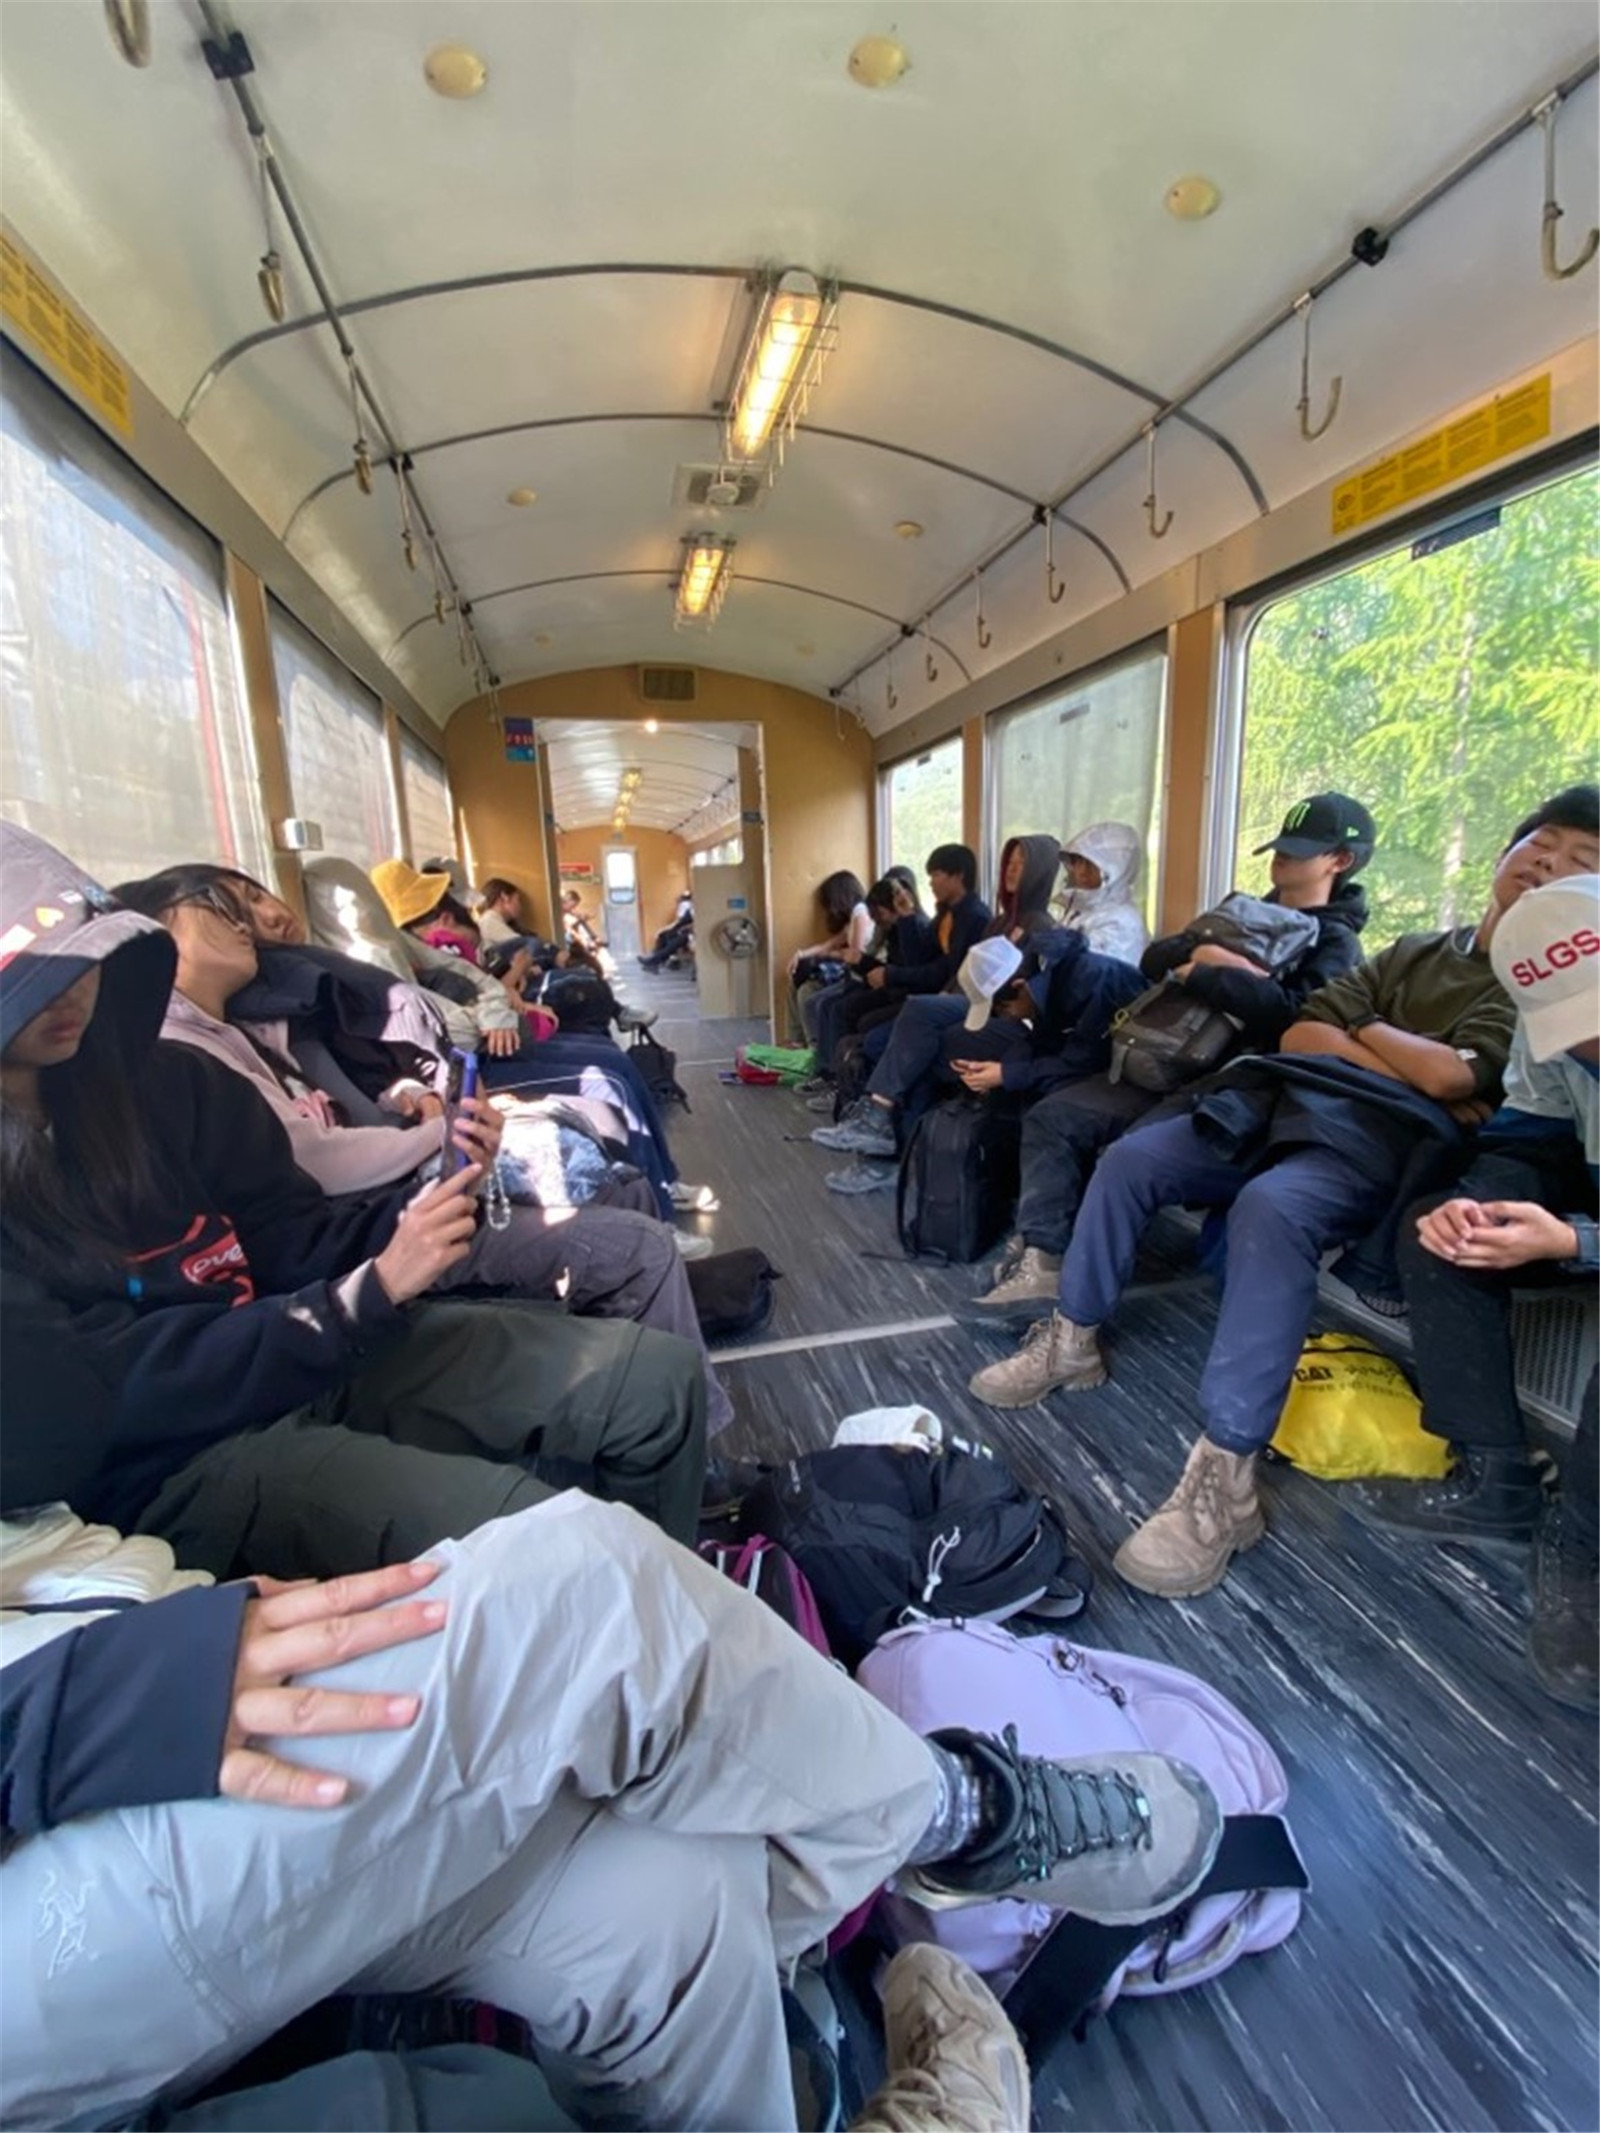 After their glacier walk, students were so tired that they fell asleep on the train ride back.